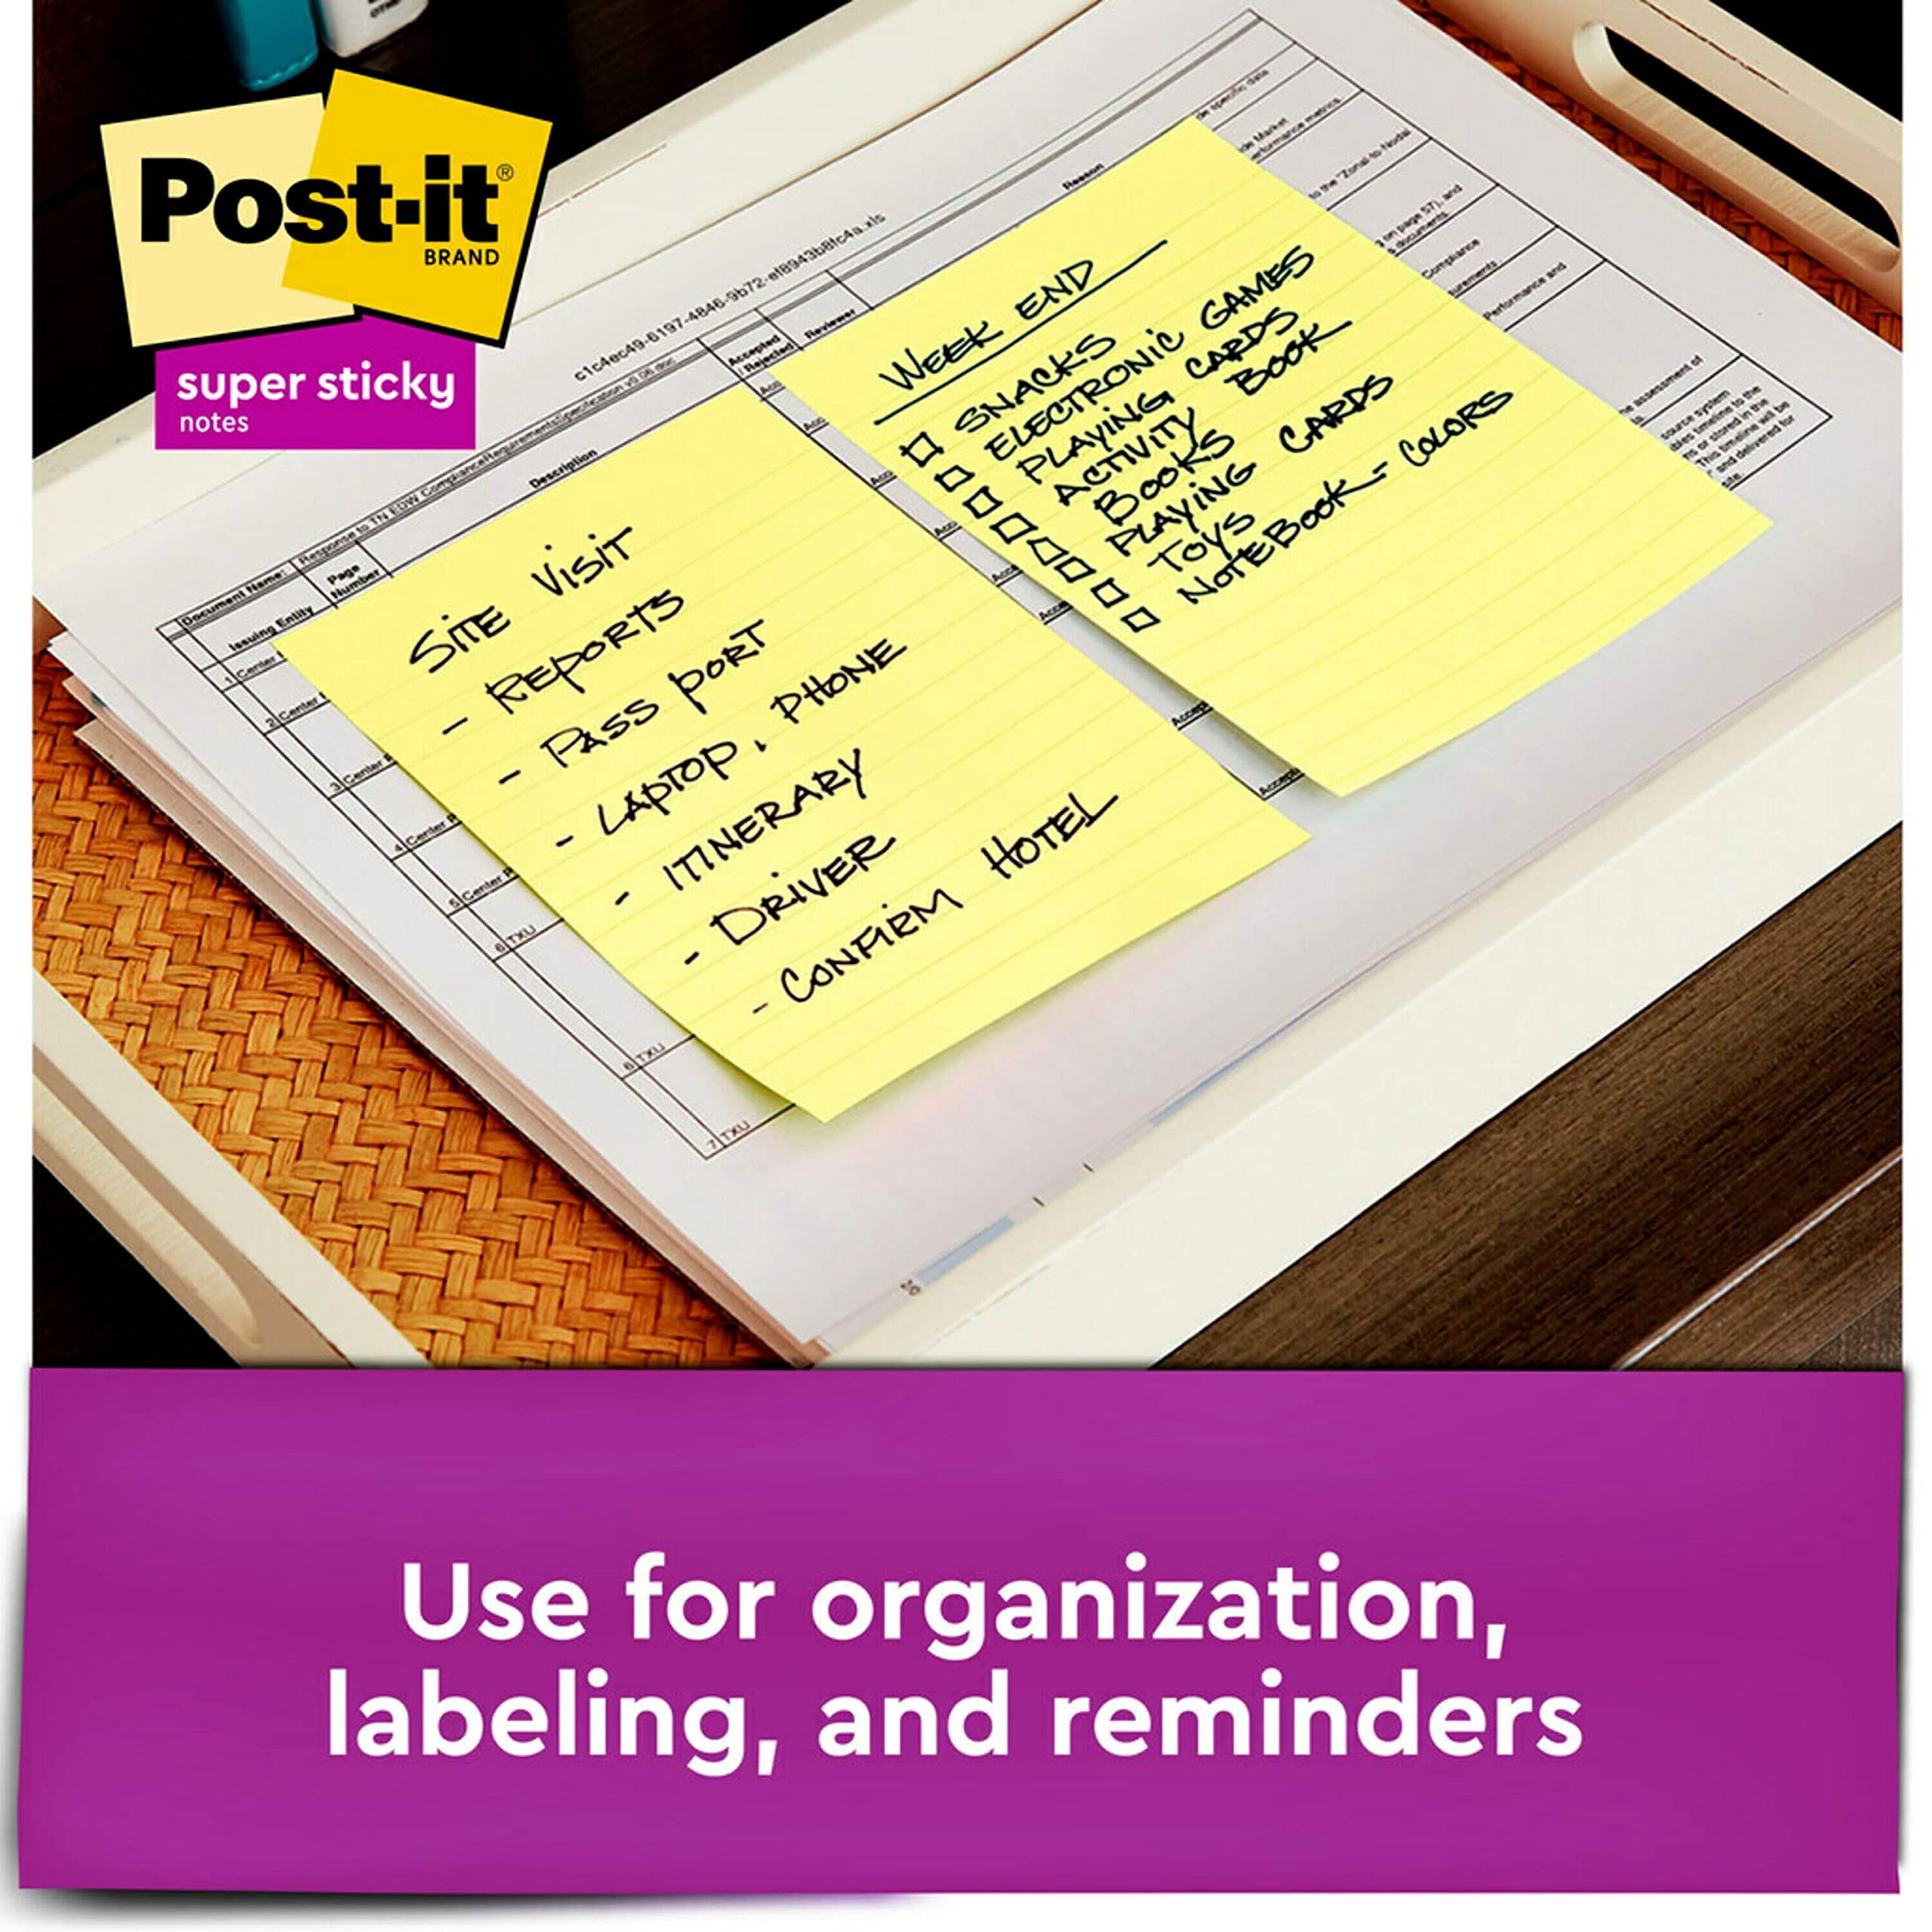 Post-it Super Sticky Notes, 4x6 in, 5 Pads, 2x the Sticking Power, Canary Yellow, Recyclable (660-5SSCY)